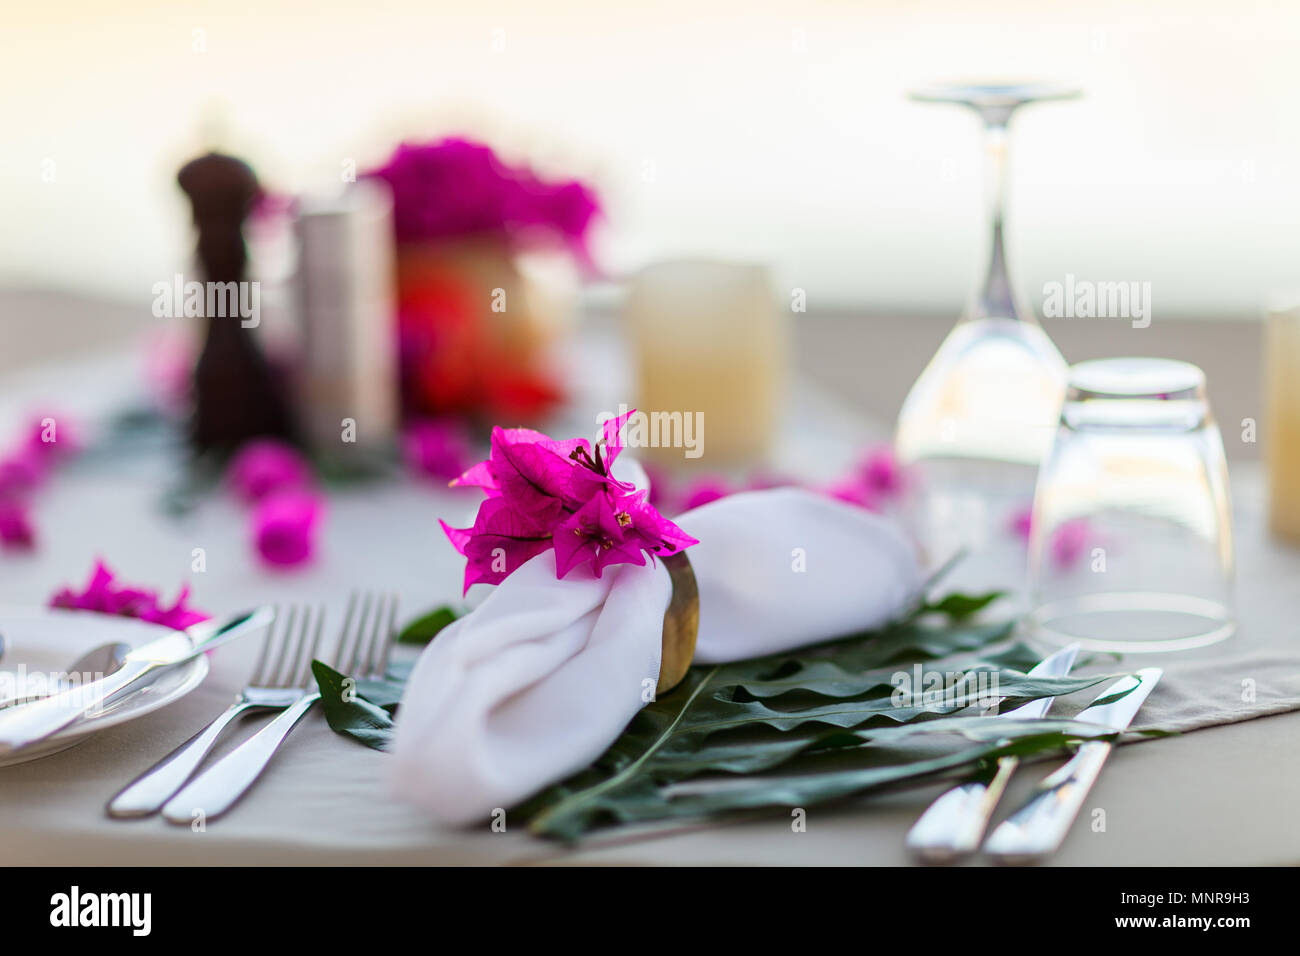 Beautifully served table for romantic event celebration or wedding Stock Photo